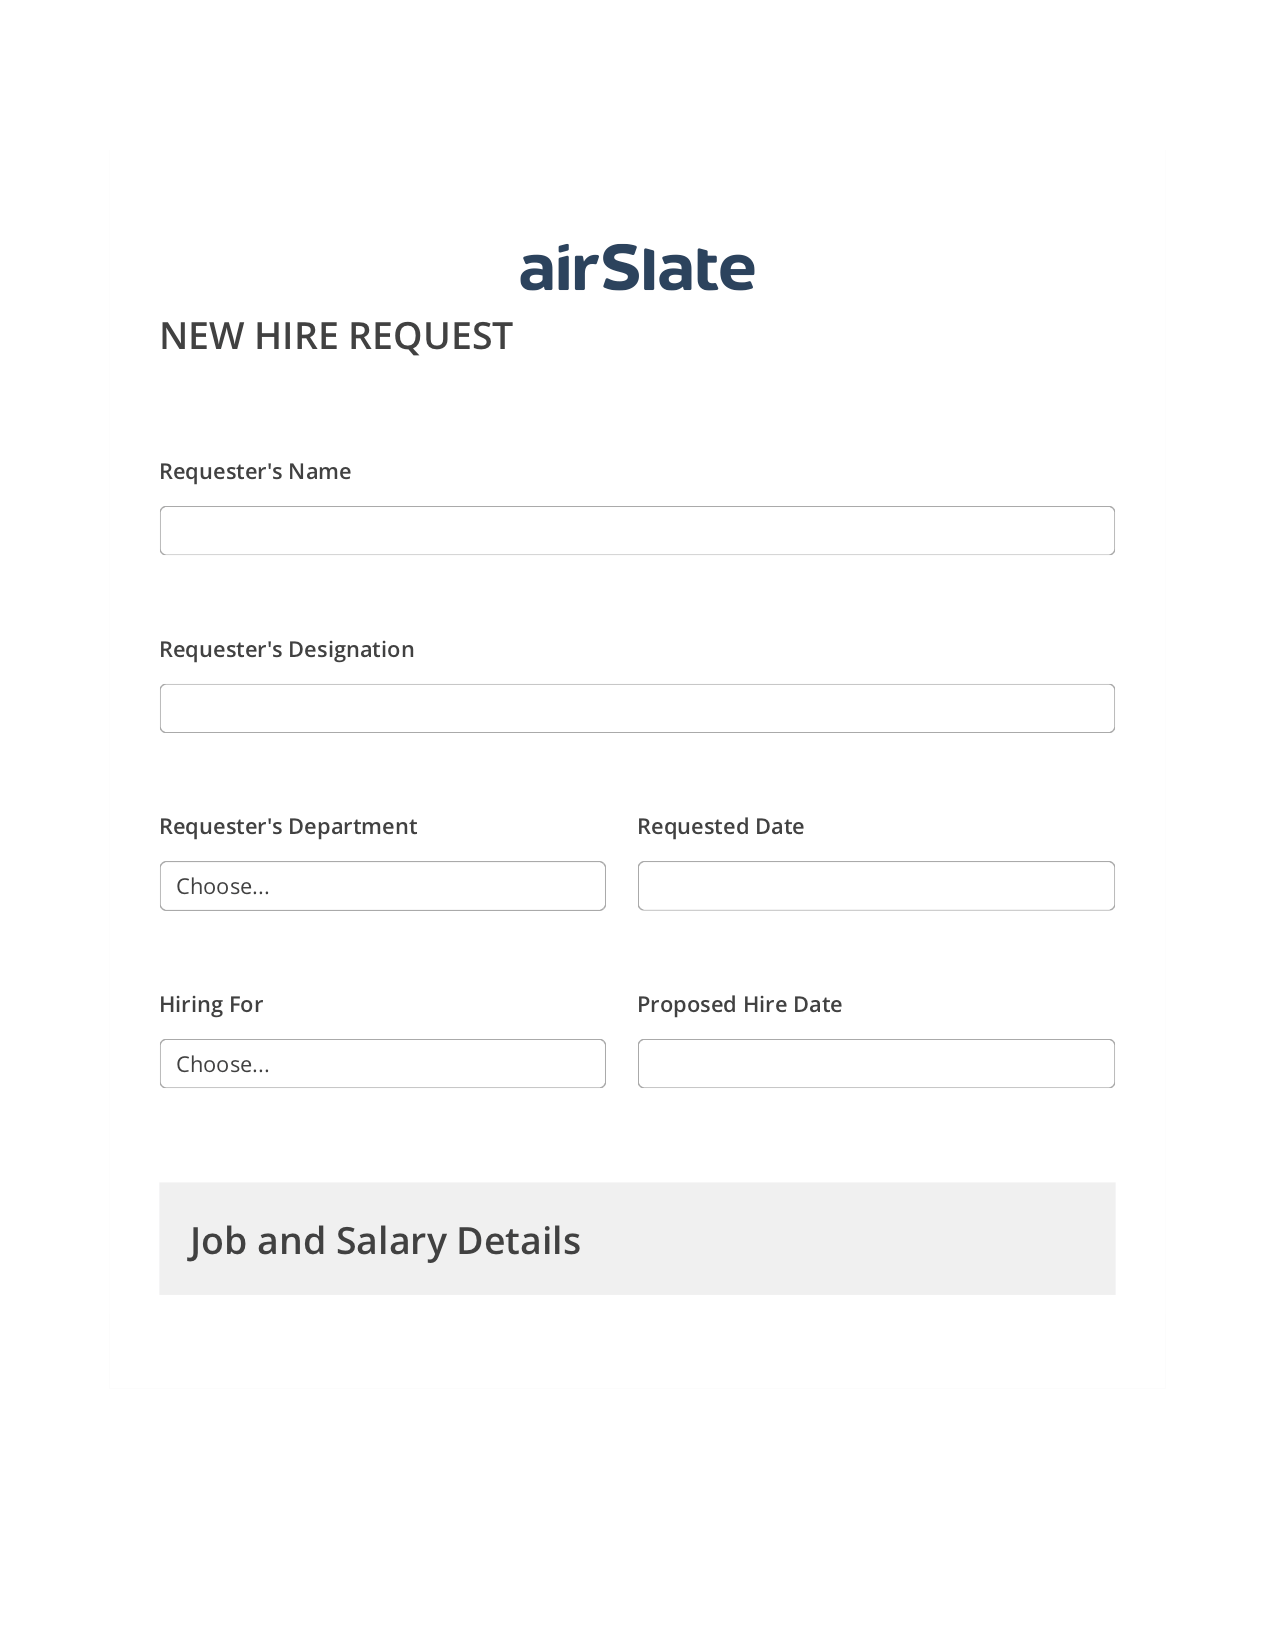 Hiring Request Workflow Pre-fill from MS Dynamics 365 Records, Update NetSuite Record Bot, Export to Salesforce Record Bot